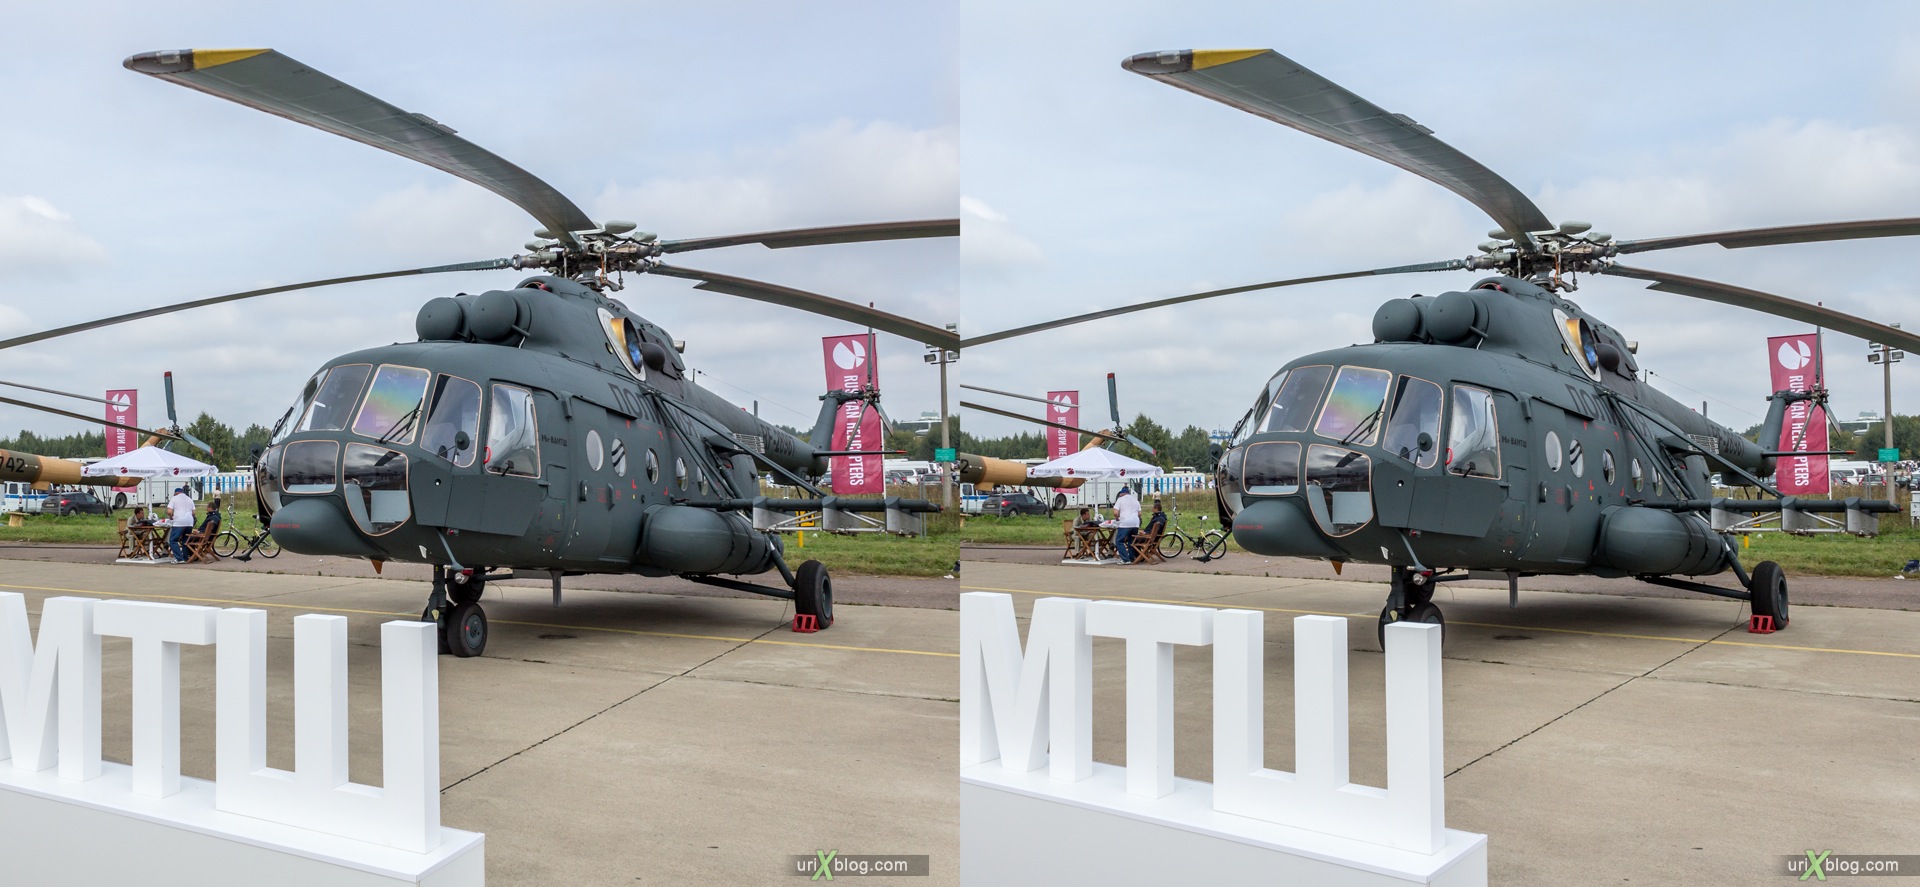 2013, MAKS, International Aviation and Space Salon, Russia, Ramenskoye airfield, Mi-8AMTSh, helicopter, 3D, stereo pair, cross-eyed, crossview, cross view stereo pair, stereoscopic